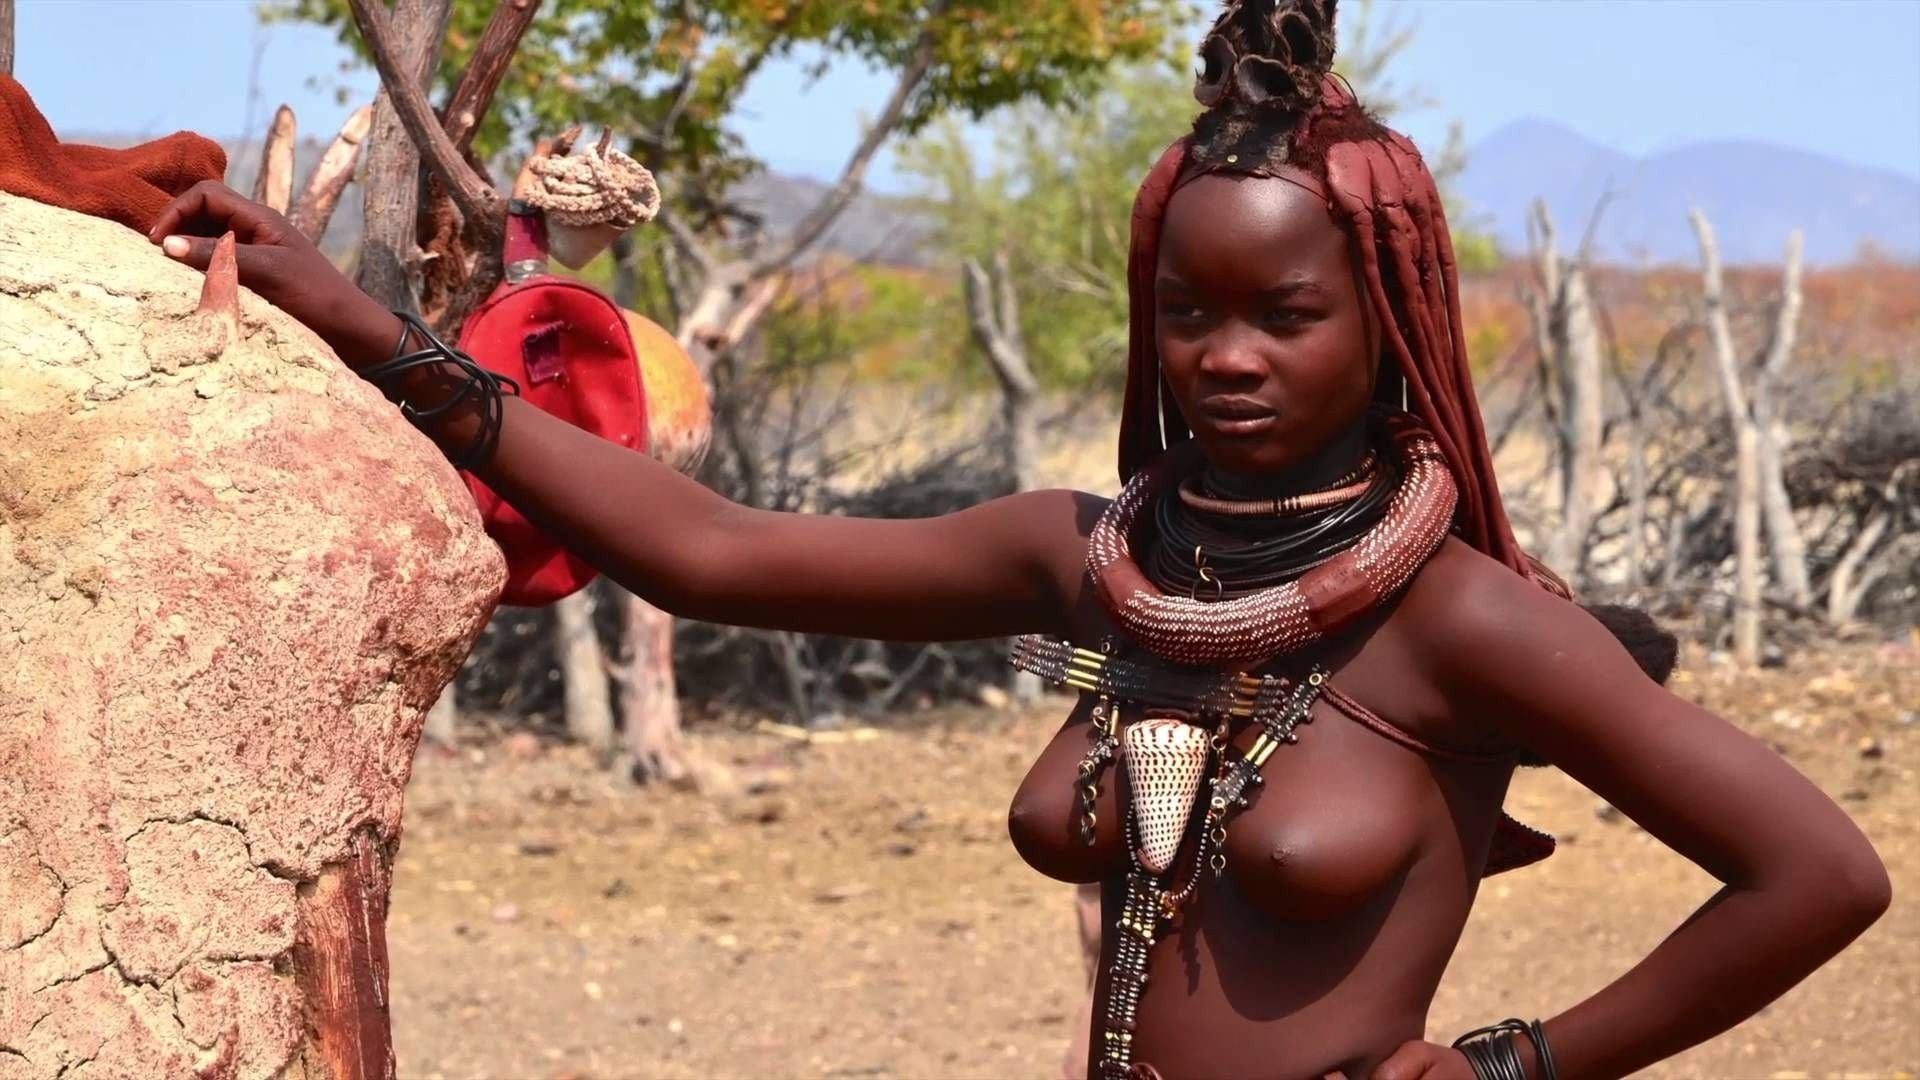 Real african porno tribe